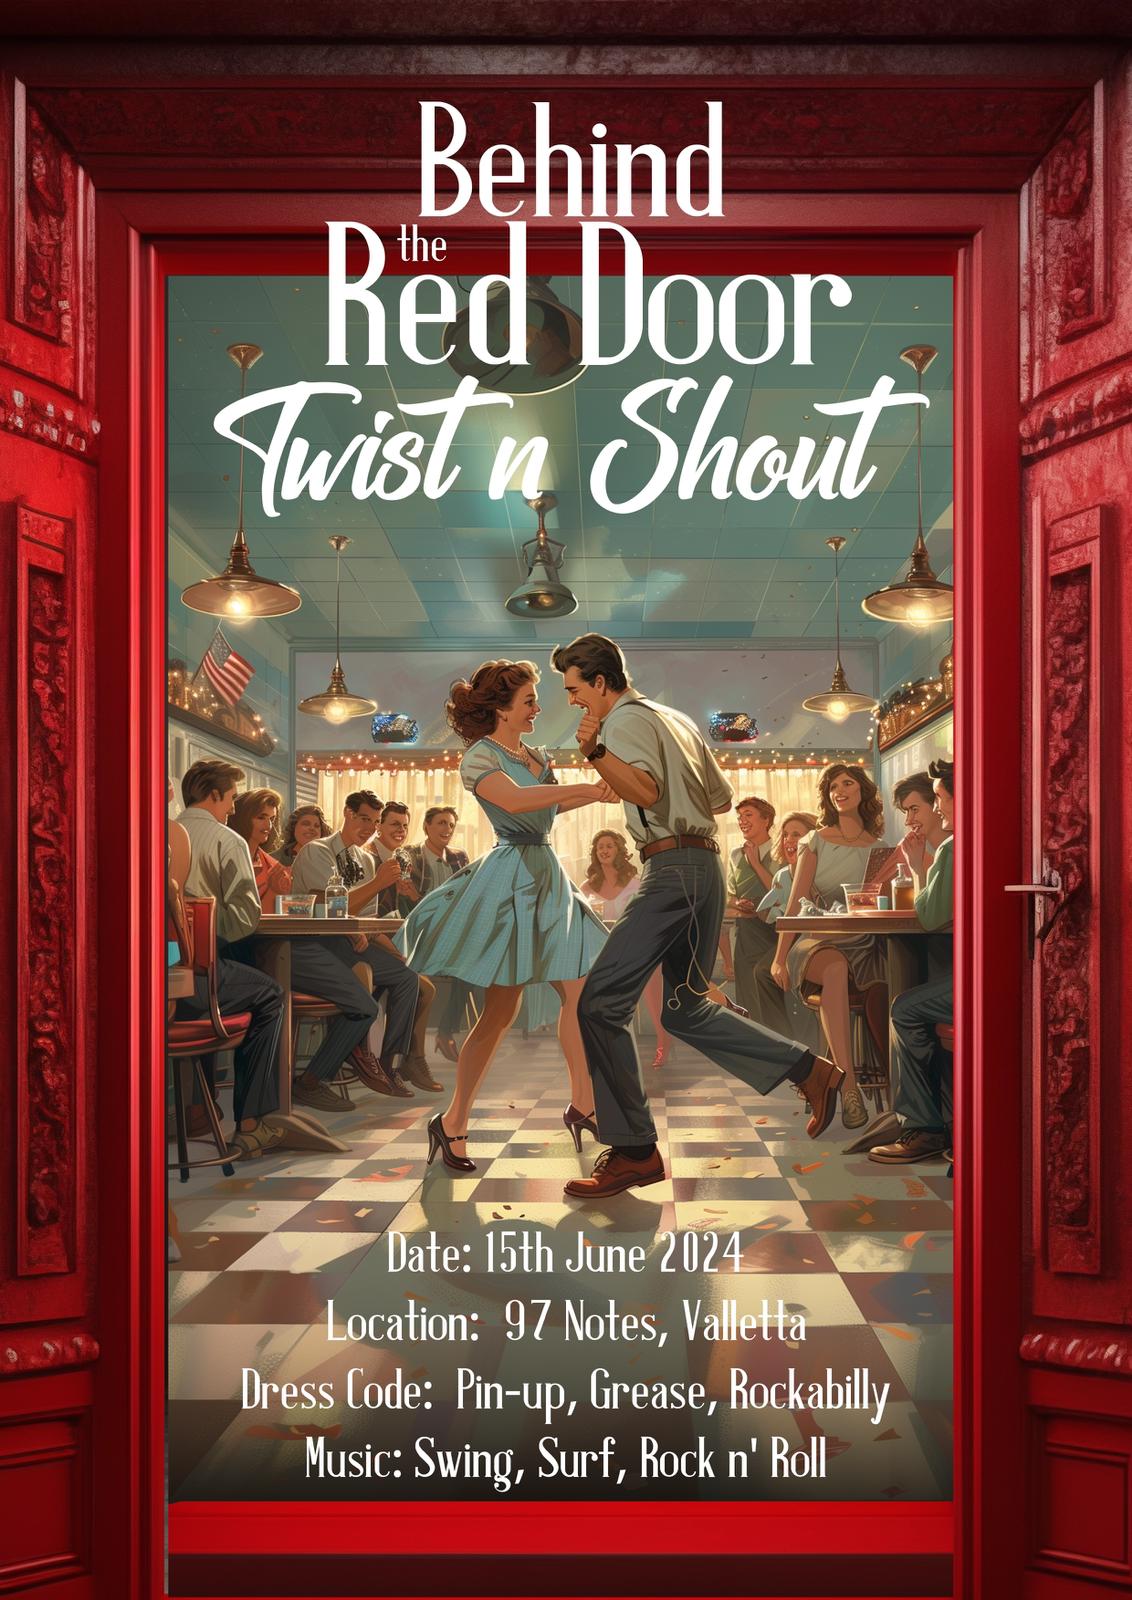 Behind the Red Door - Twist n Shout @97Notes poster